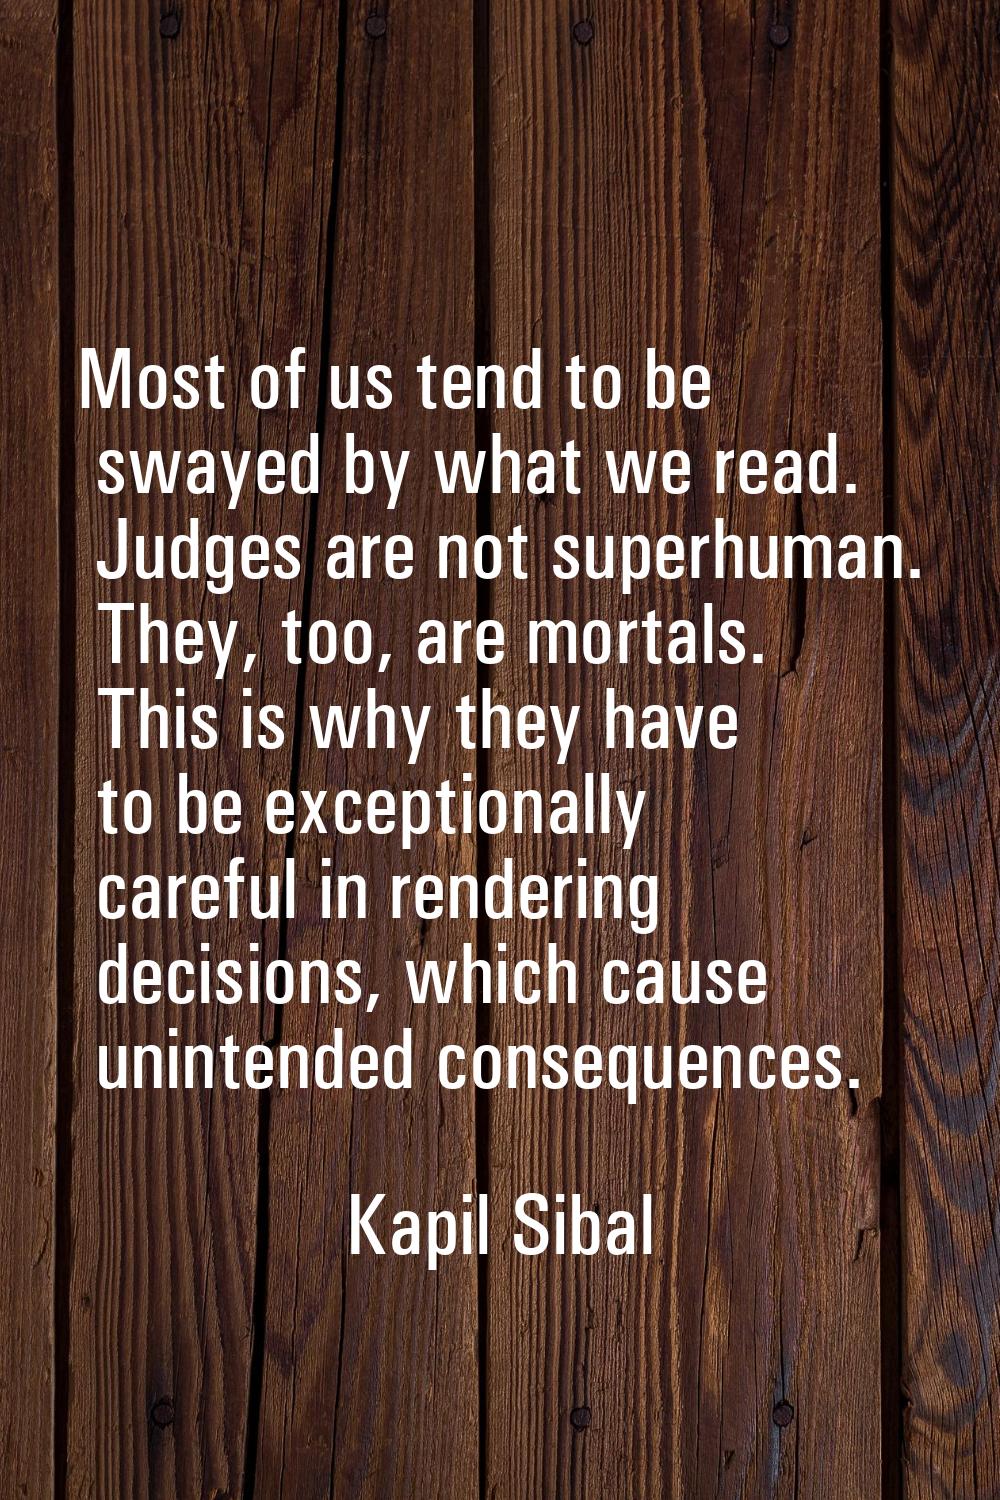 Most of us tend to be swayed by what we read. Judges are not superhuman. They, too, are mortals. Th